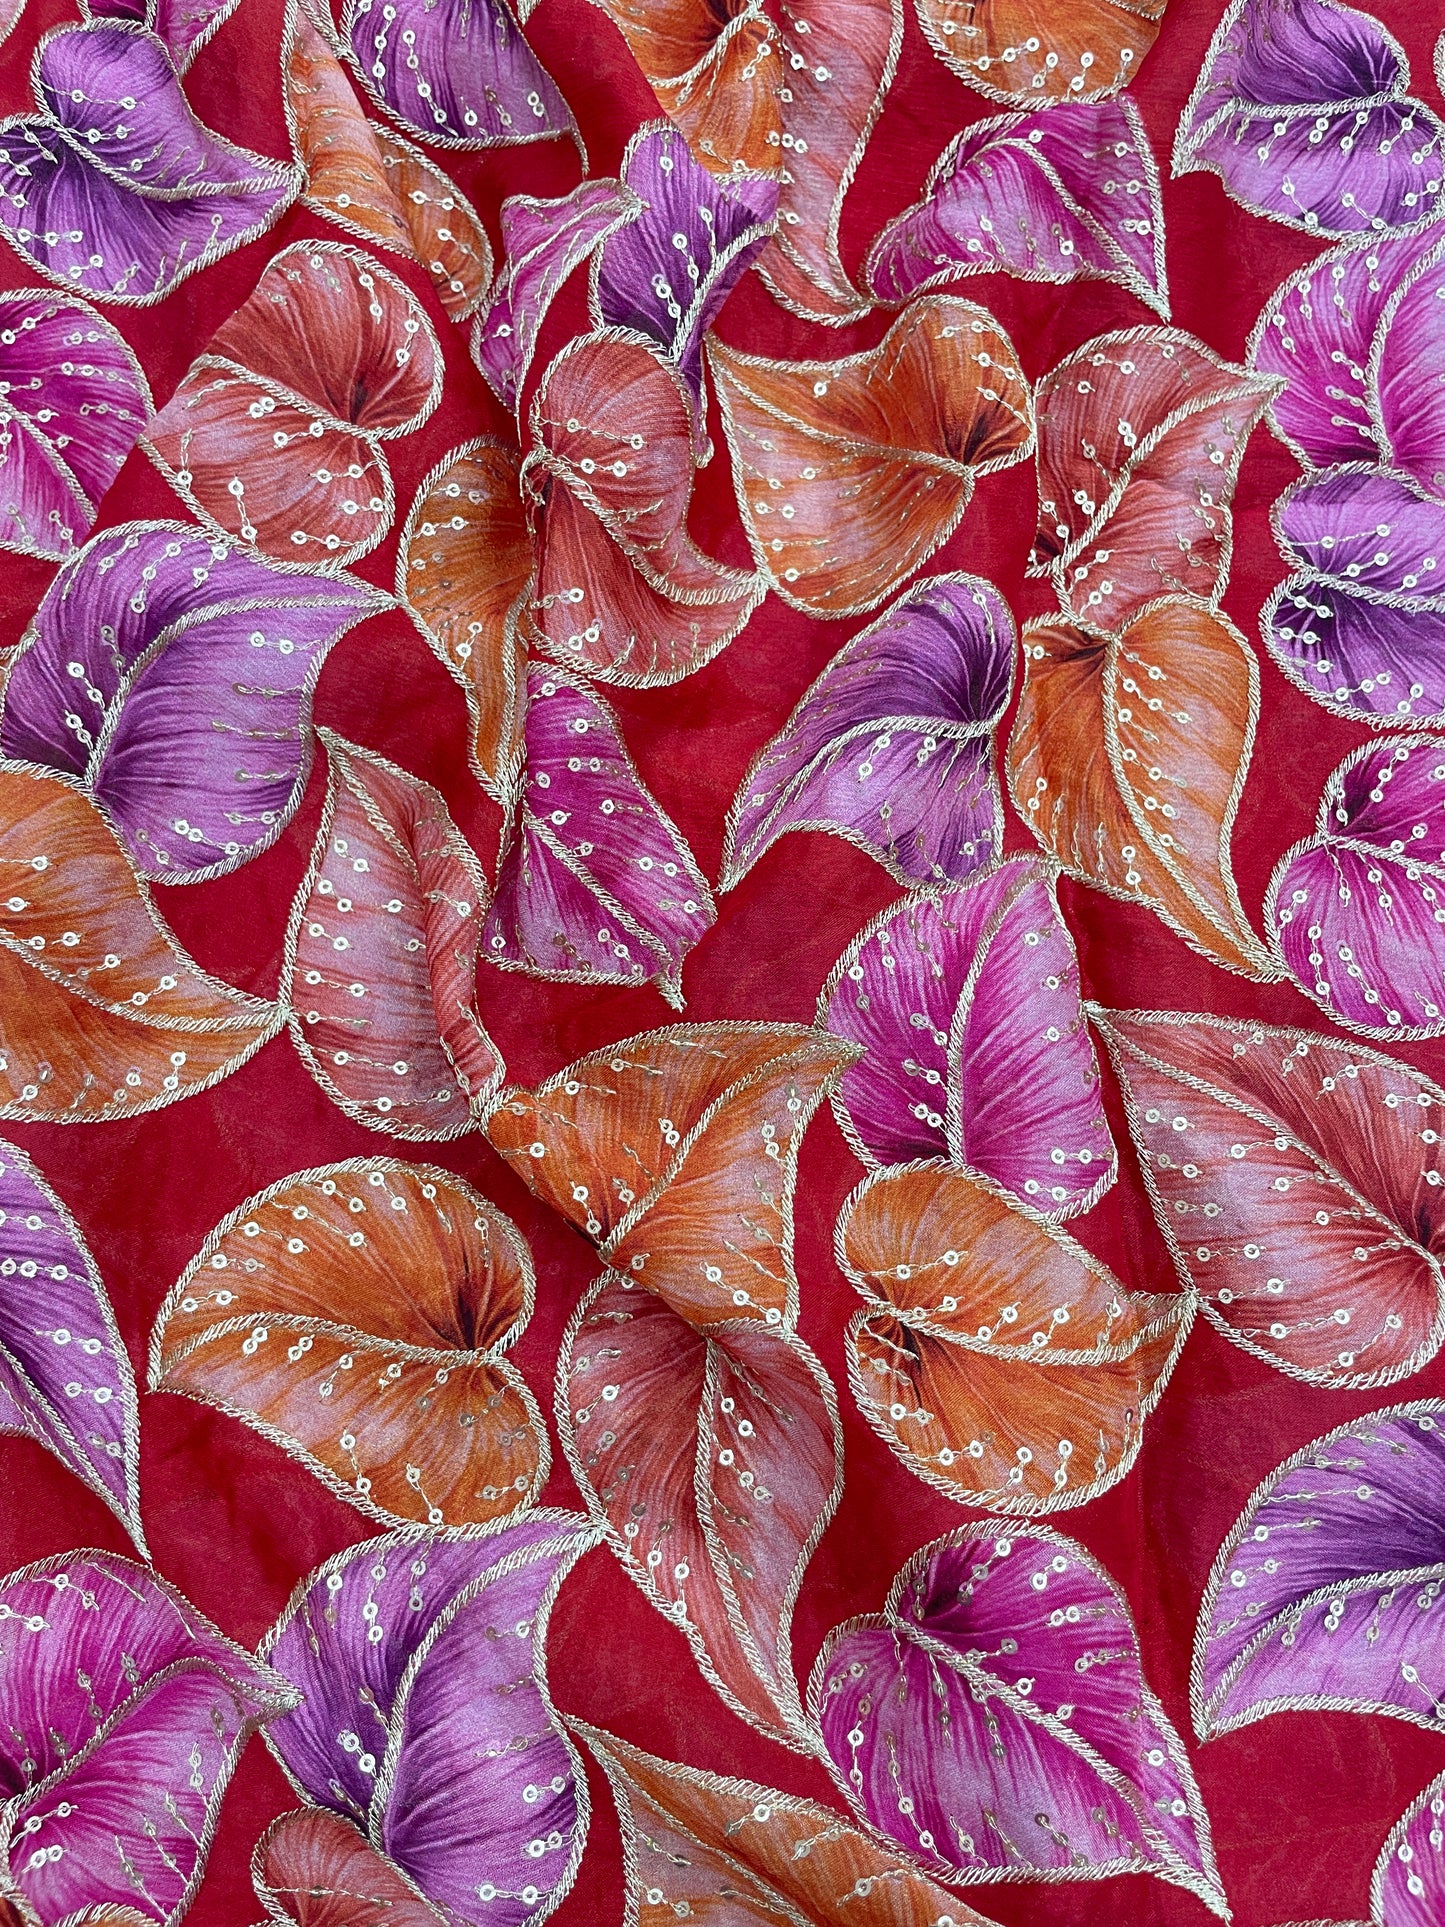 Stunning Marvelous Colorful Leafy Print With Zari And Sequin Work On Chinon Fabric